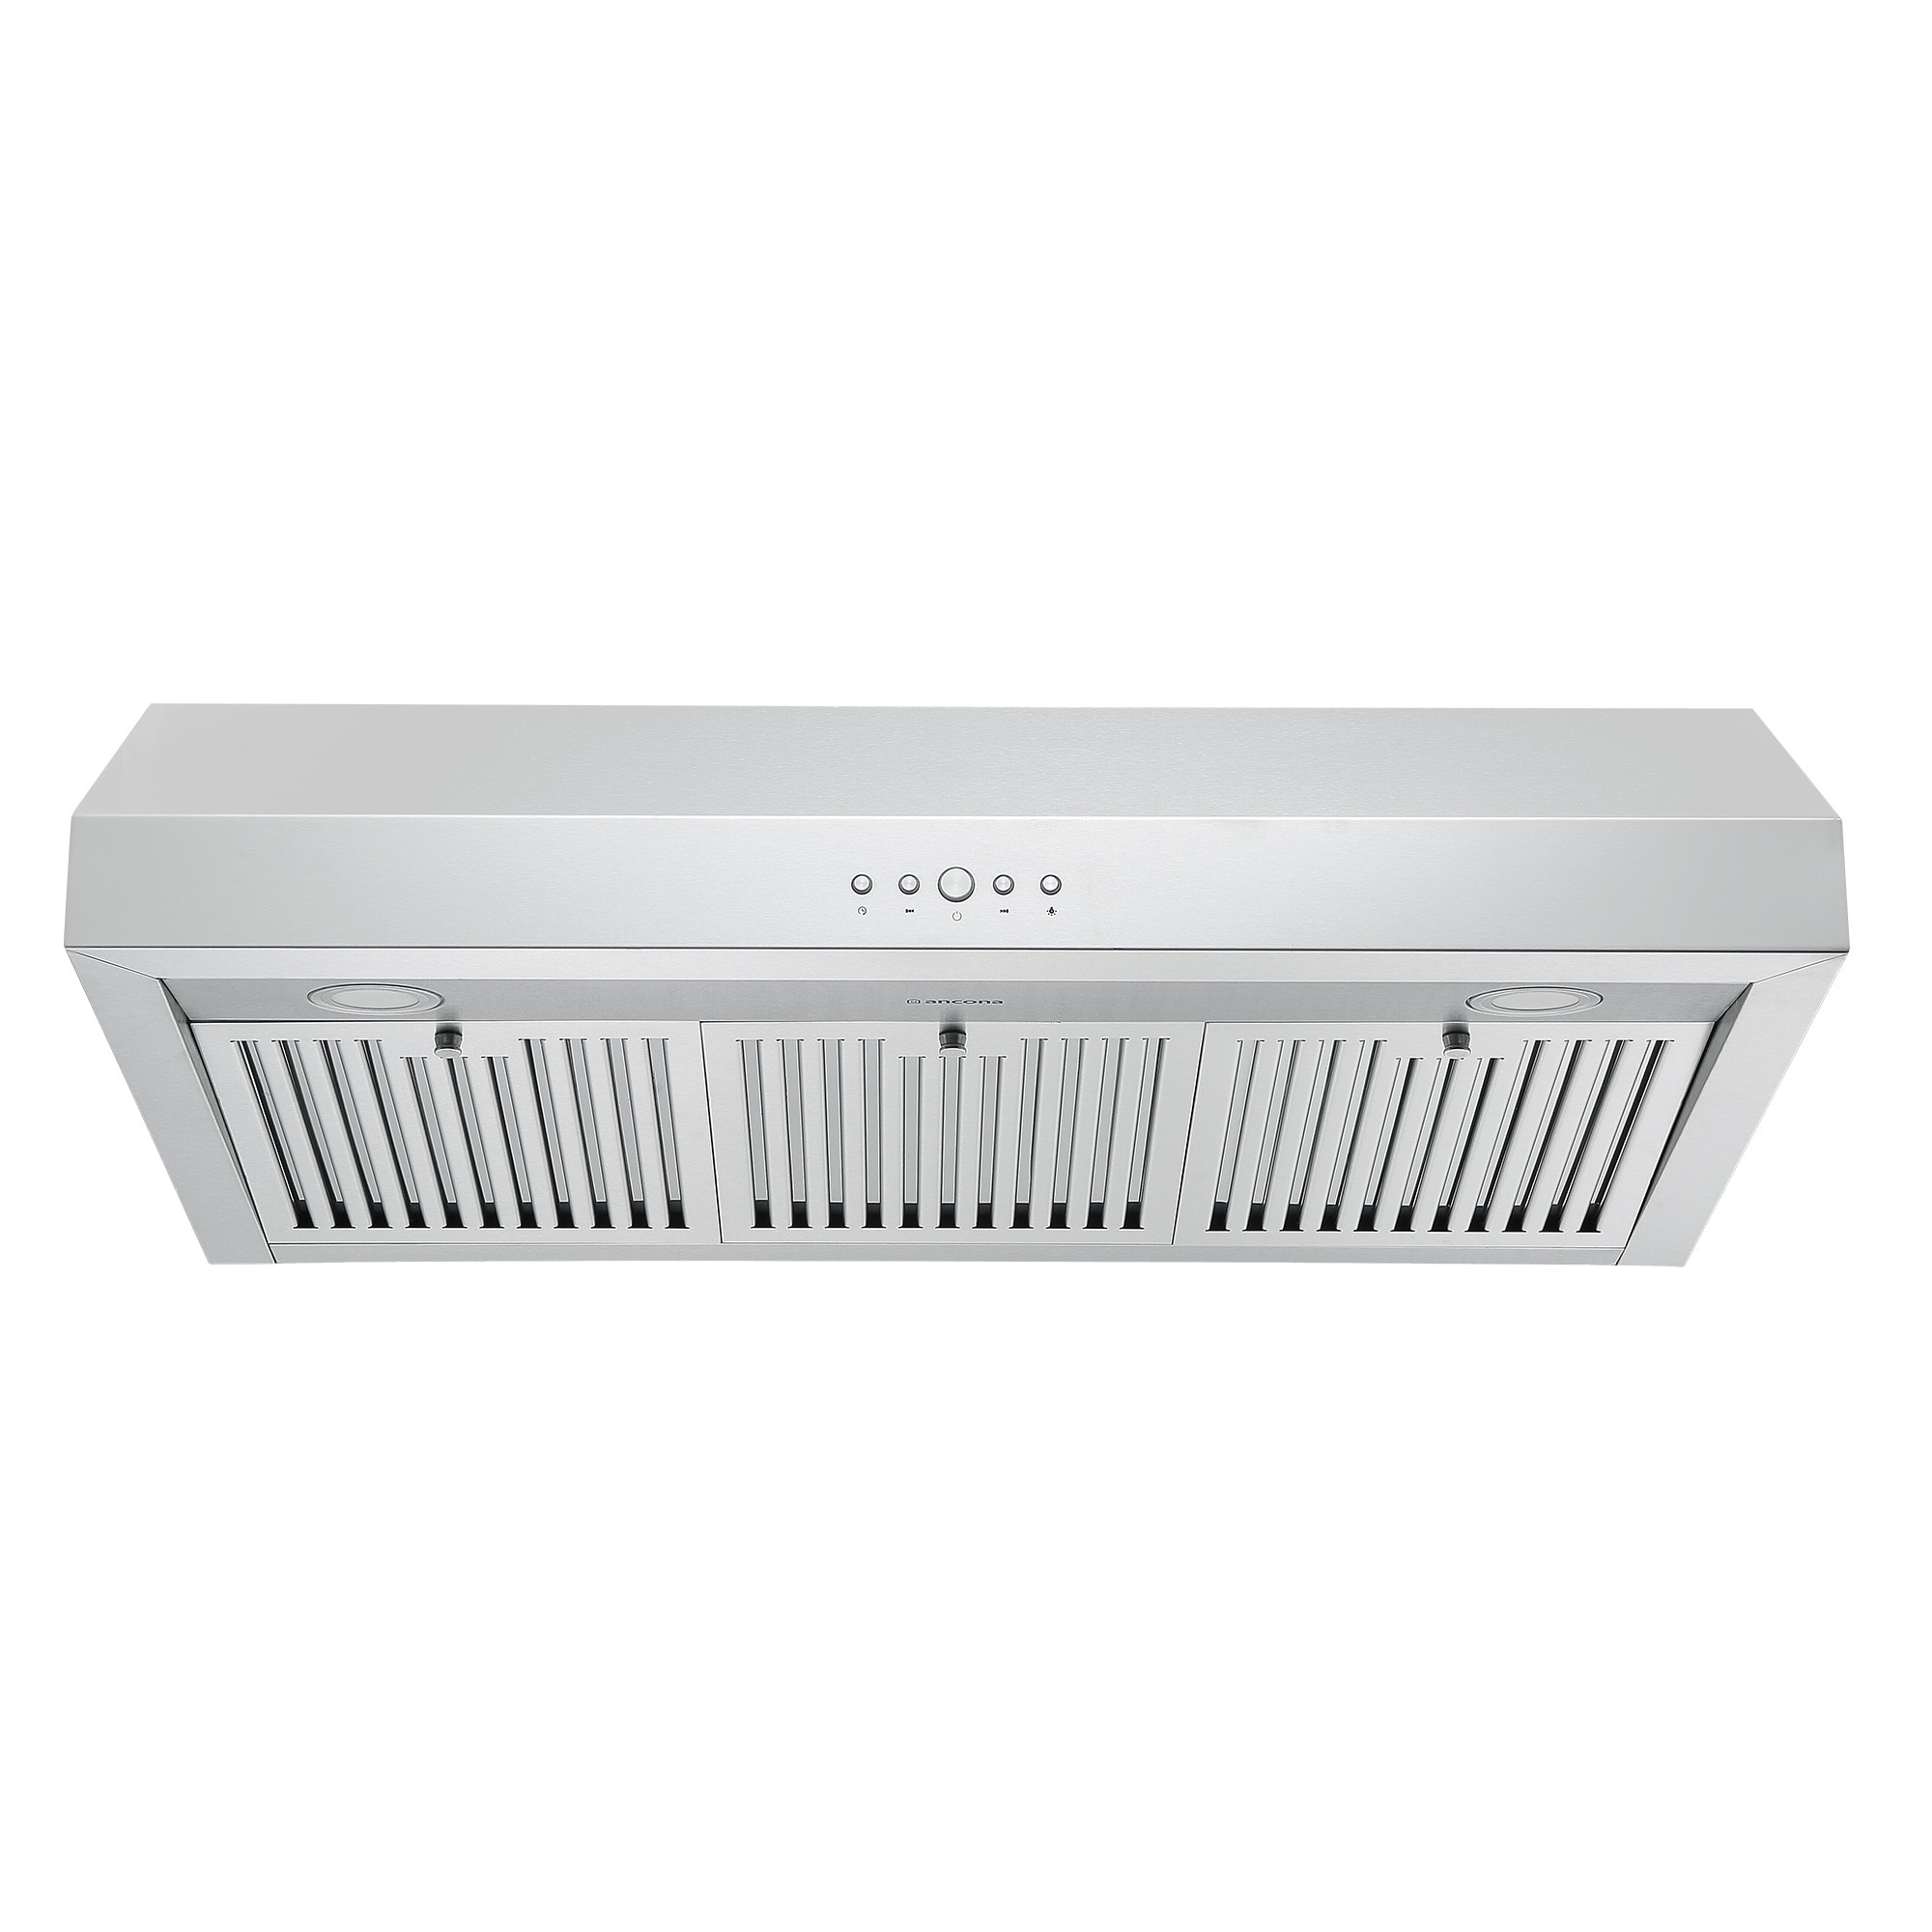 Ancona 36-in Ducted Stainless Steel Undercabinet Range Hood at Lowes.com